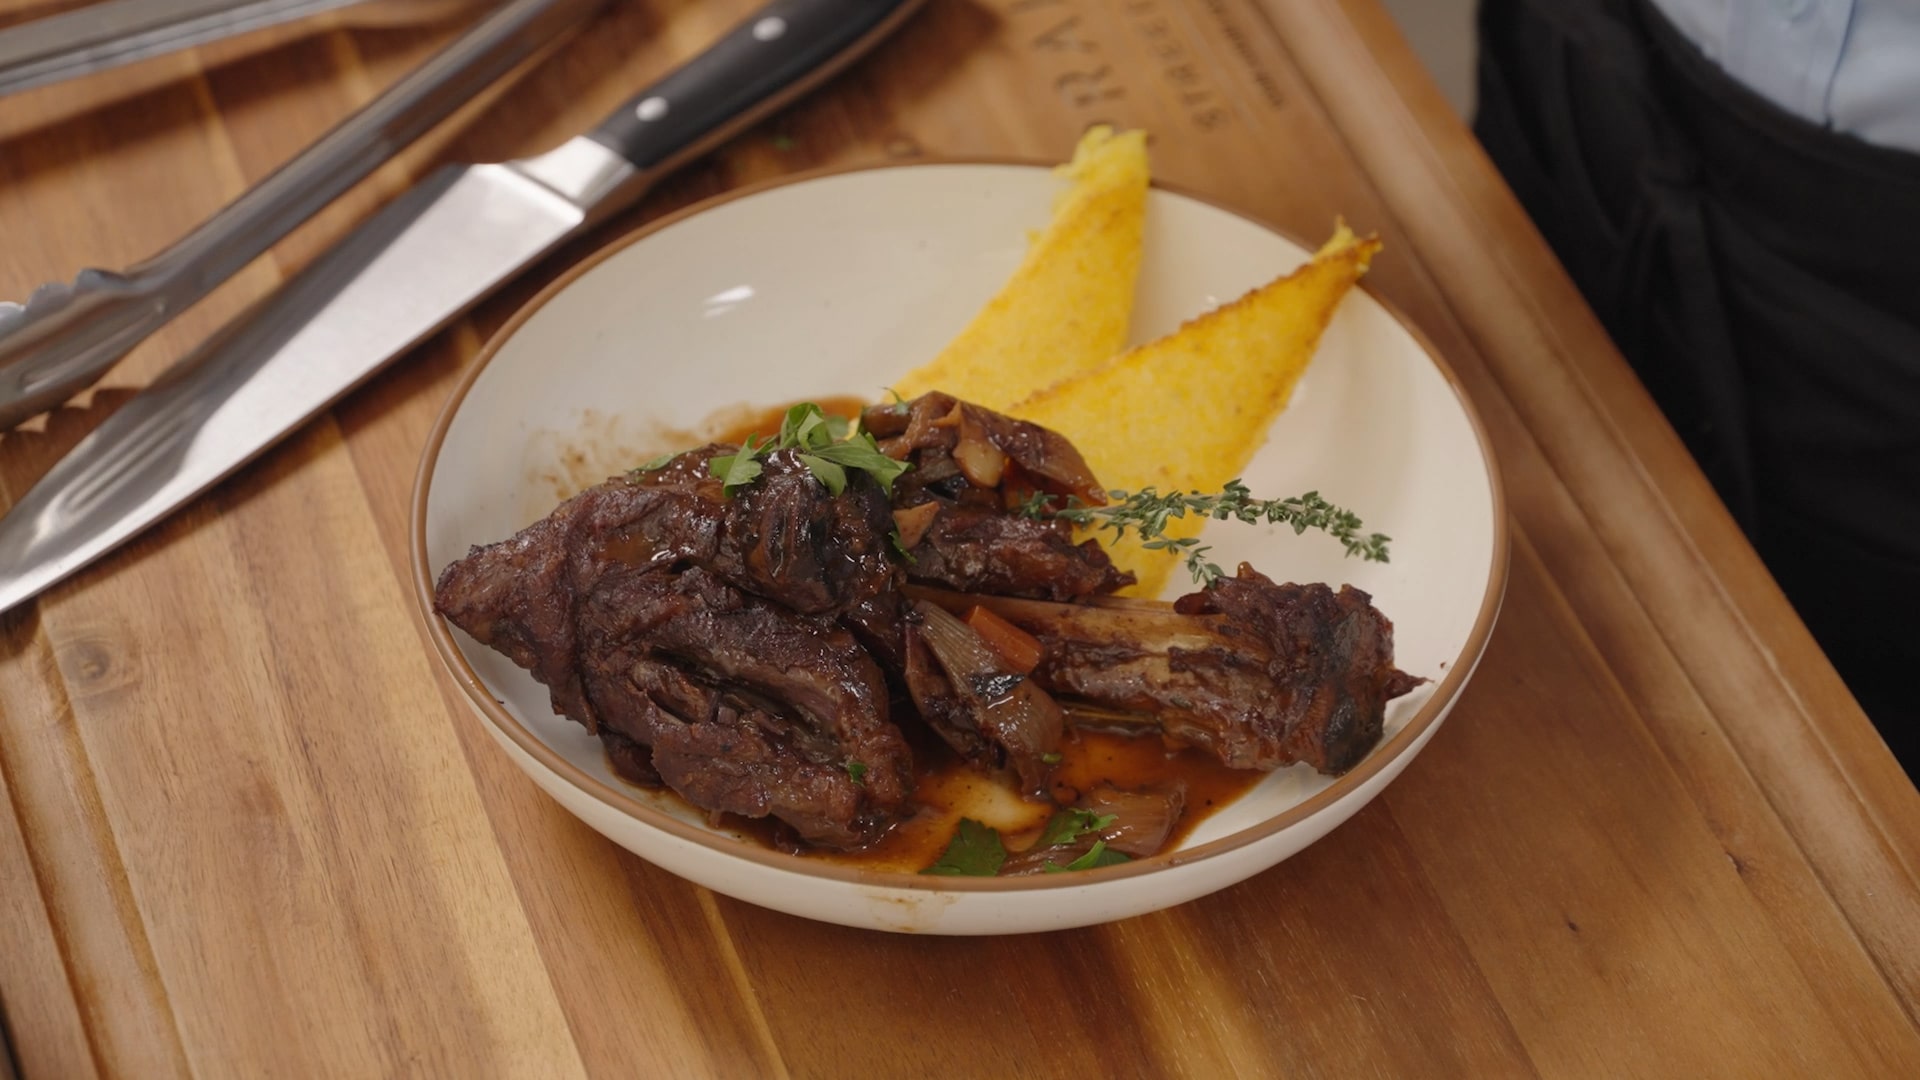 Braised Lamb Shank with Polenta by Chef Erica